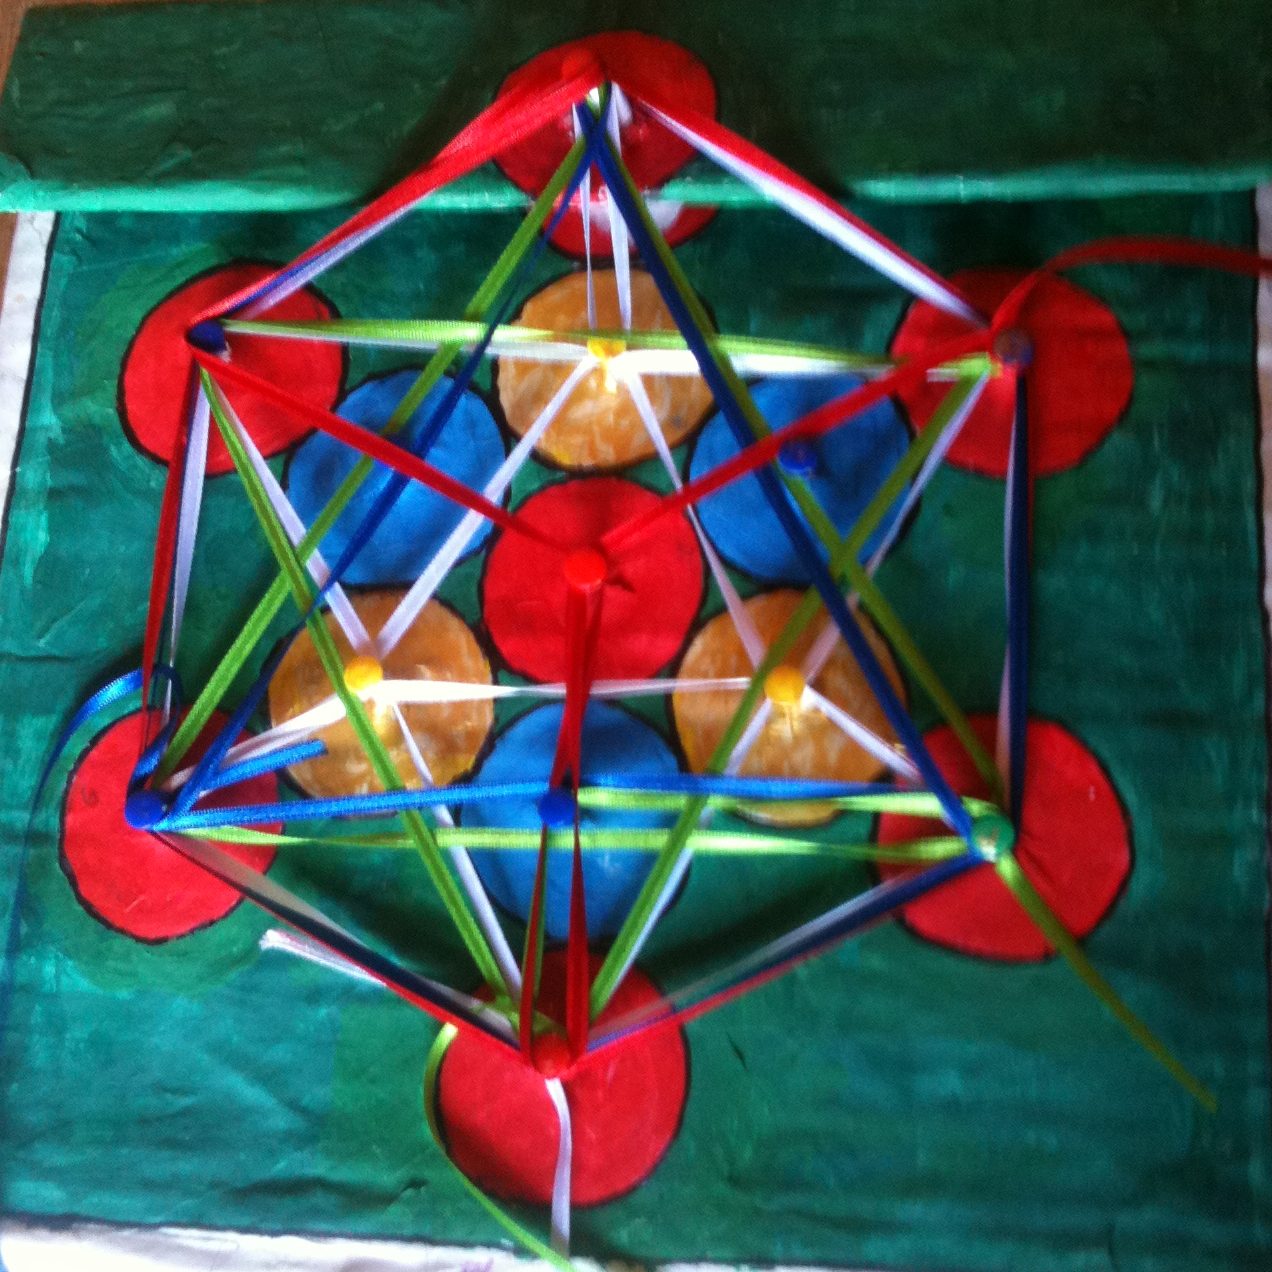 FLOWER OF LIFE GAME